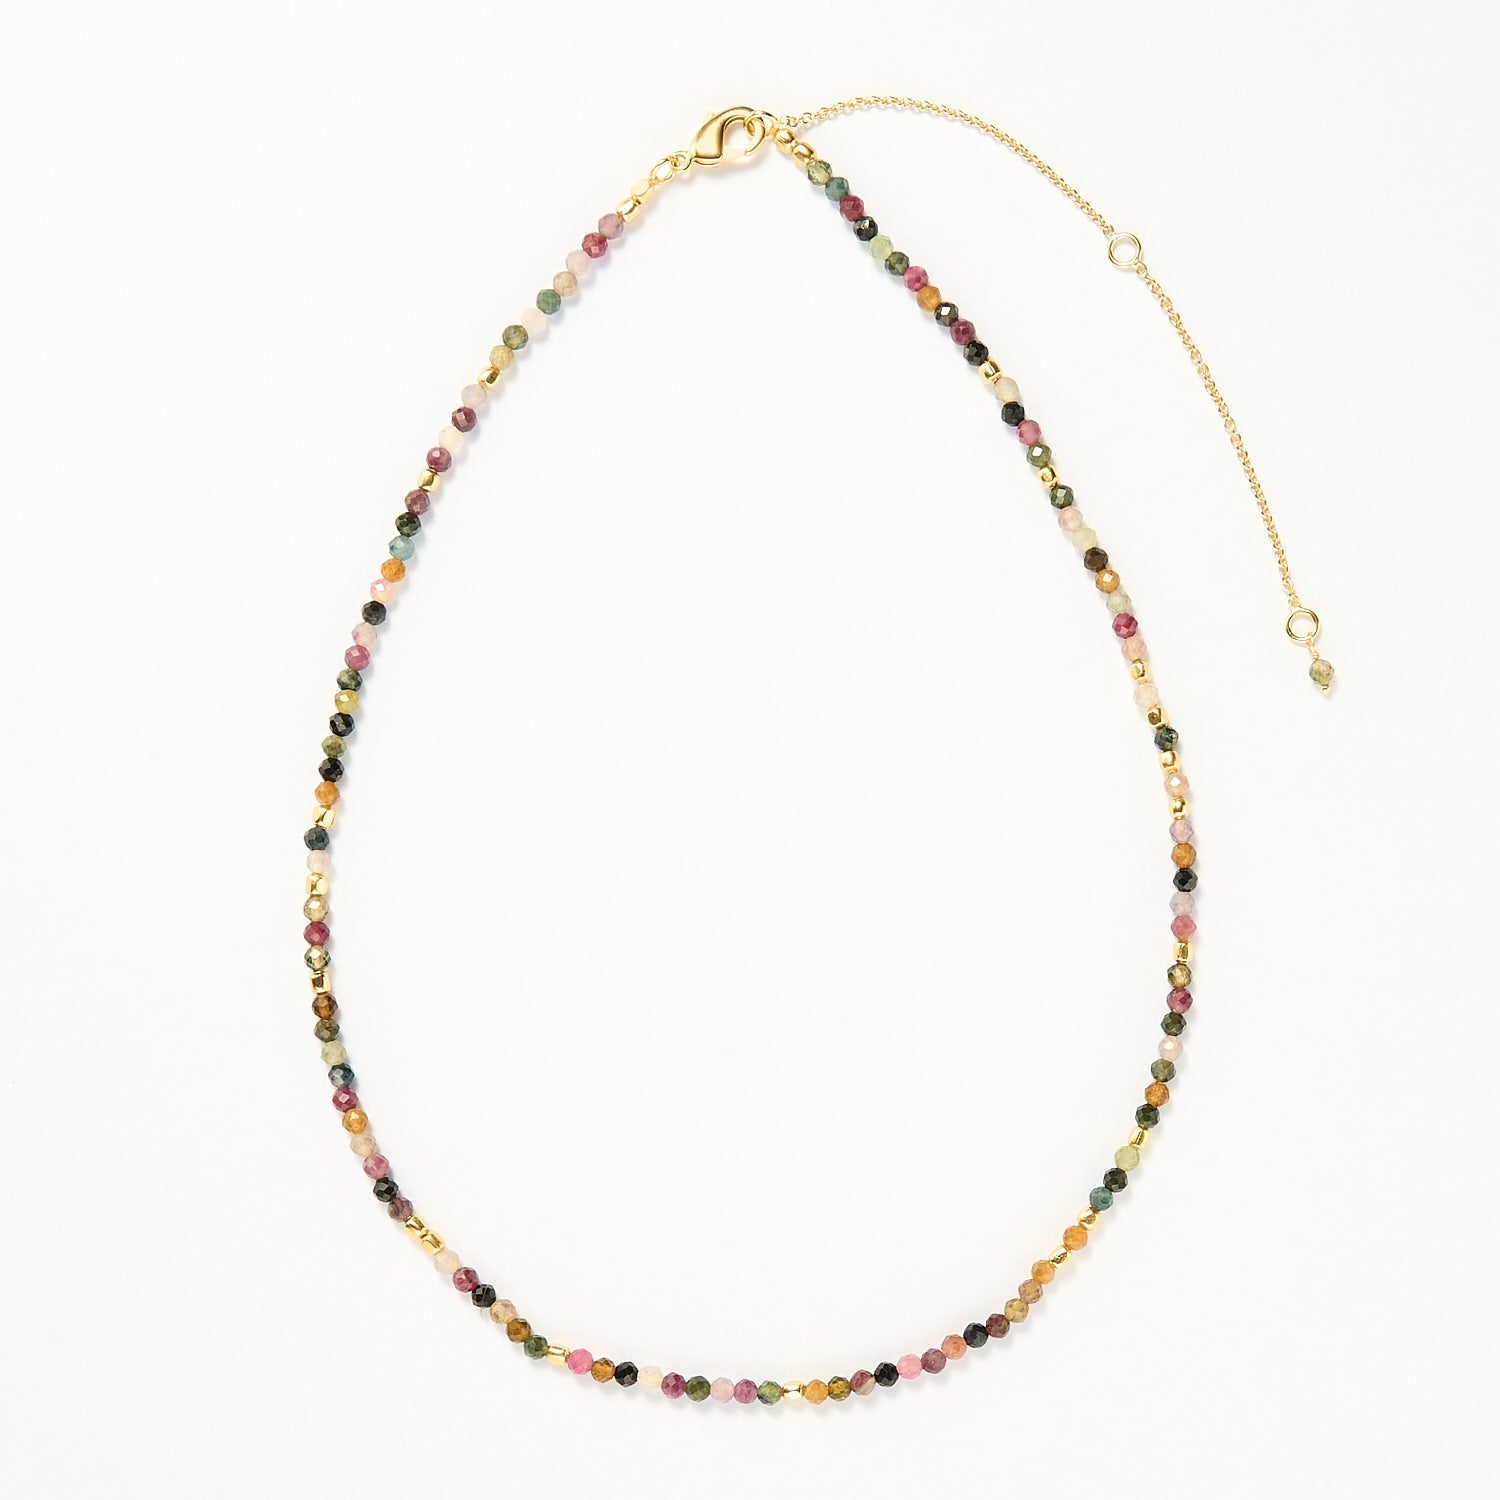 Bali beaded necklace -  Watermelon Tourmaline, Gold  Brass collection